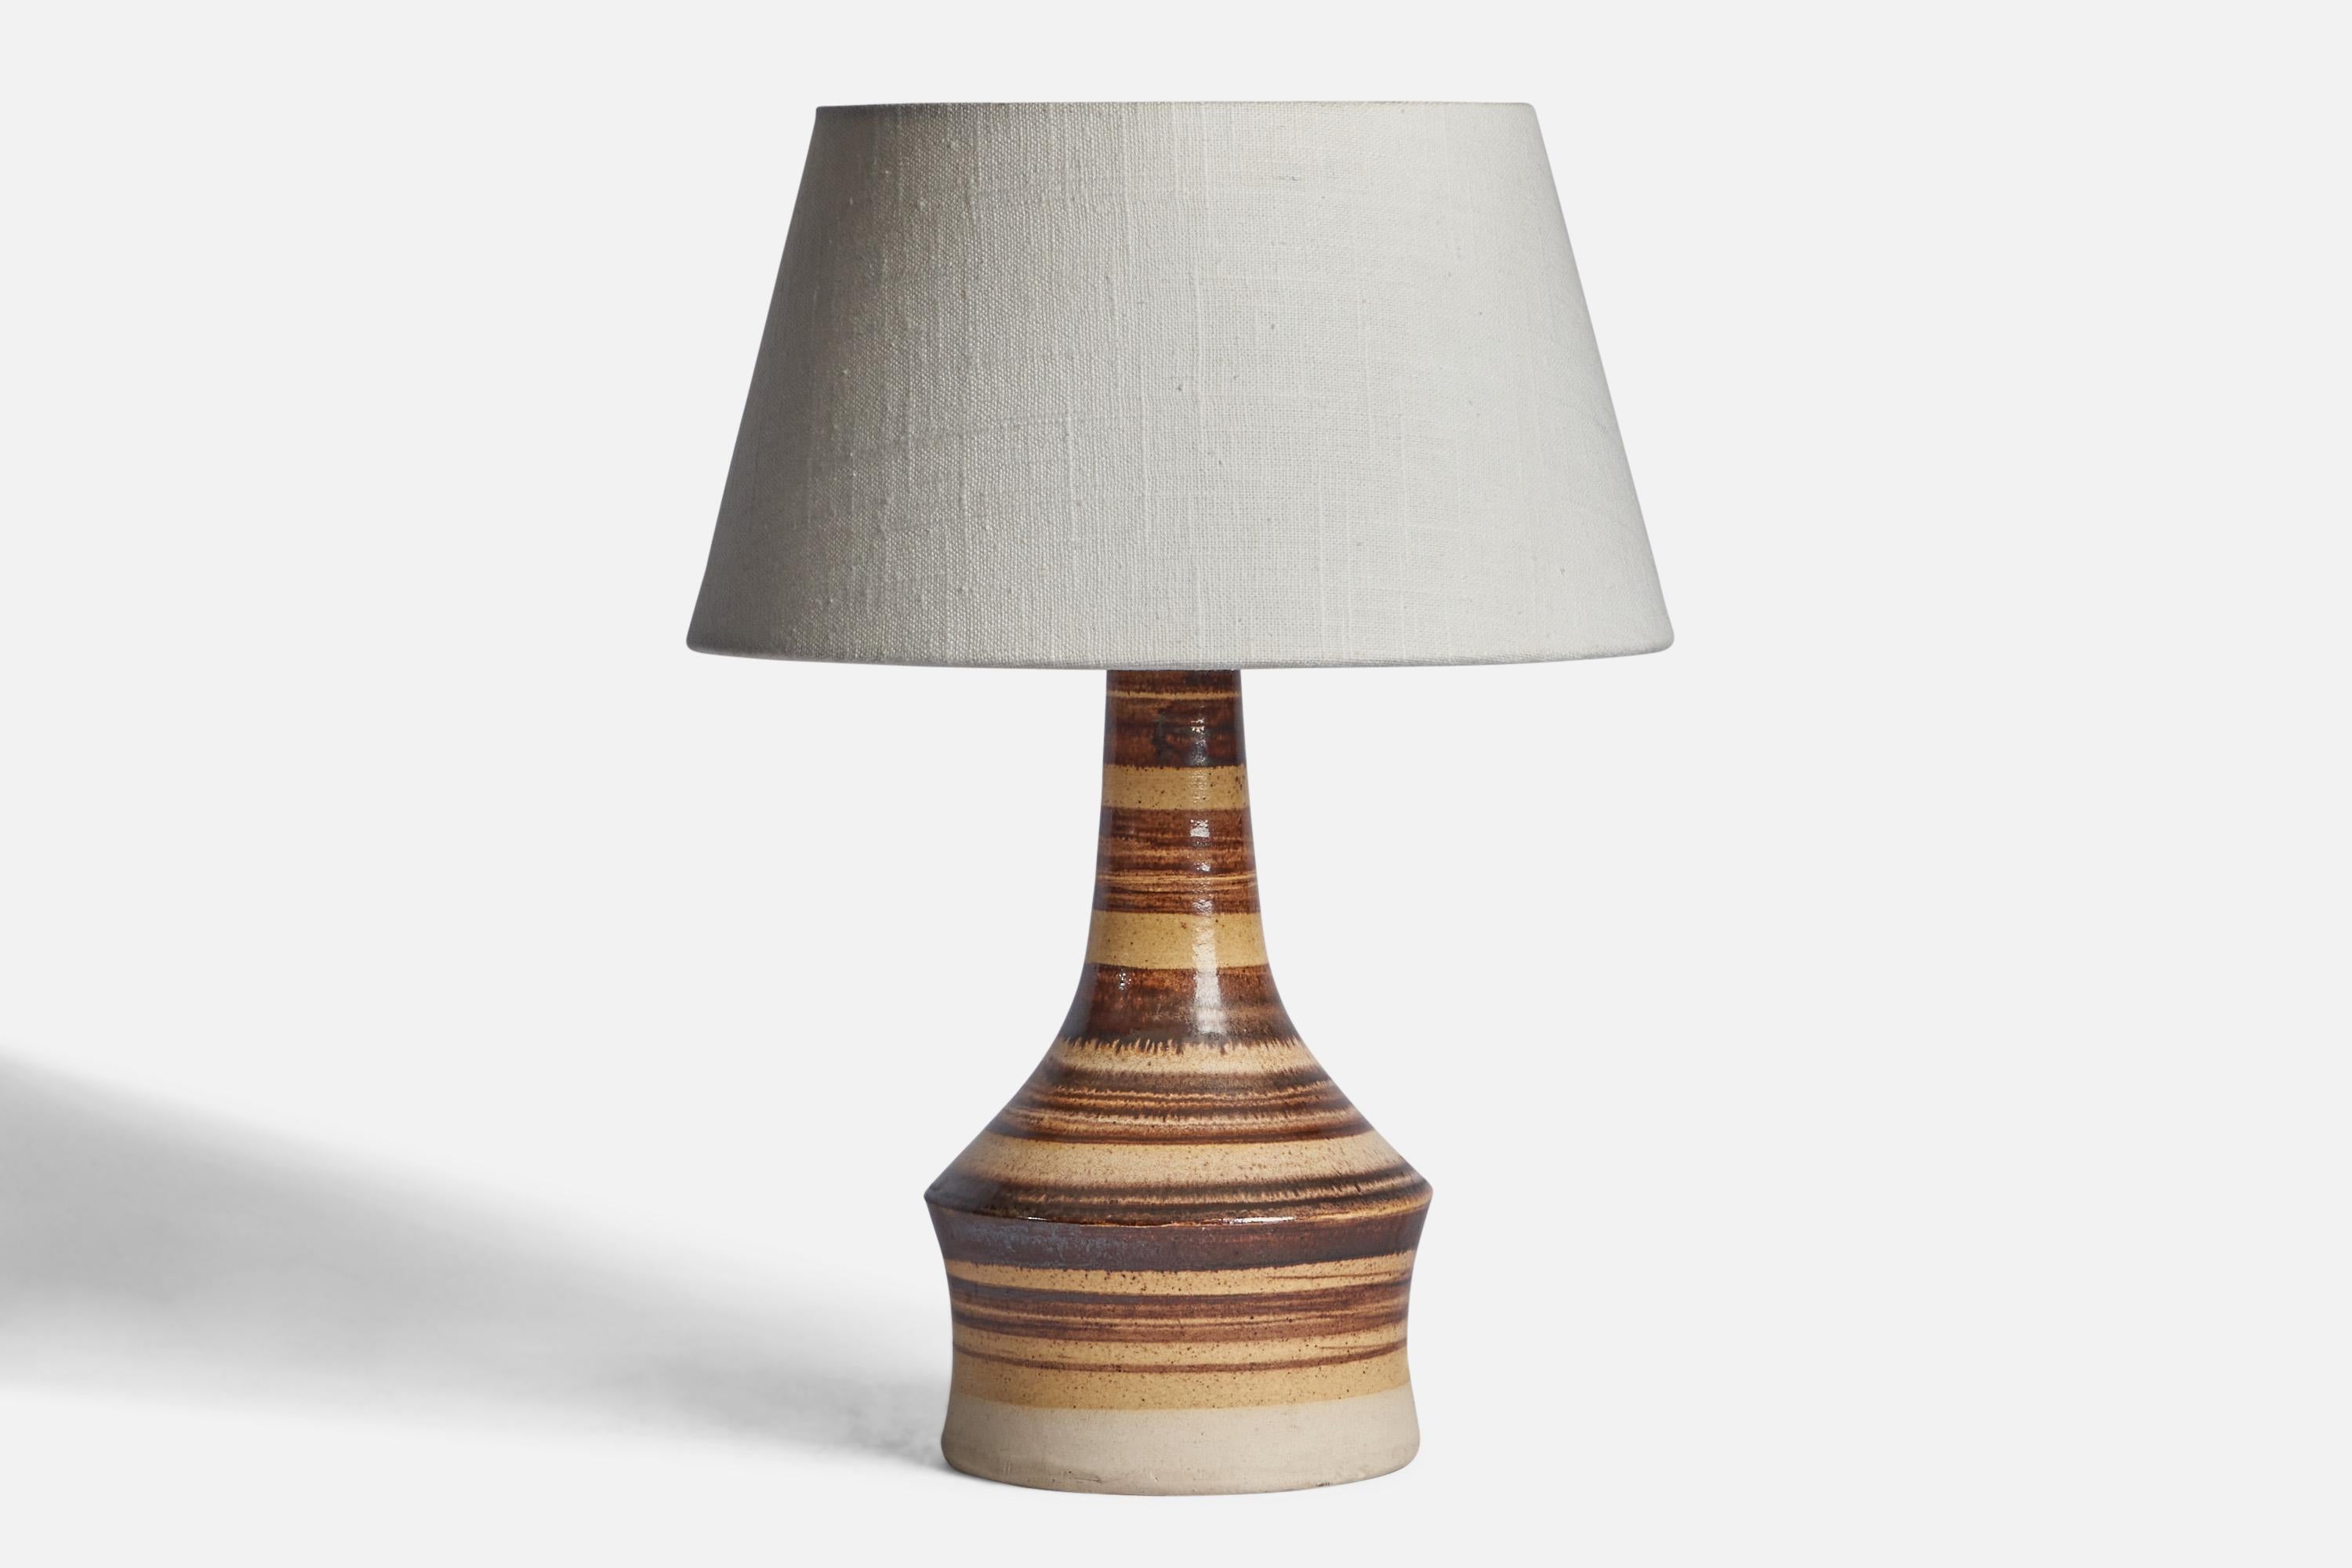 A brown and beige-painted stoneware table lamp designed and produced in Denmark, 1960s.

Dimensions of Lamp (inches): 10.75” H x 5.75” Diameter
Dimensions of Shade (inches): 7” Top Diameter x 10” Bottom Diameter x 5.5” H 
Dimensions of Lamp with